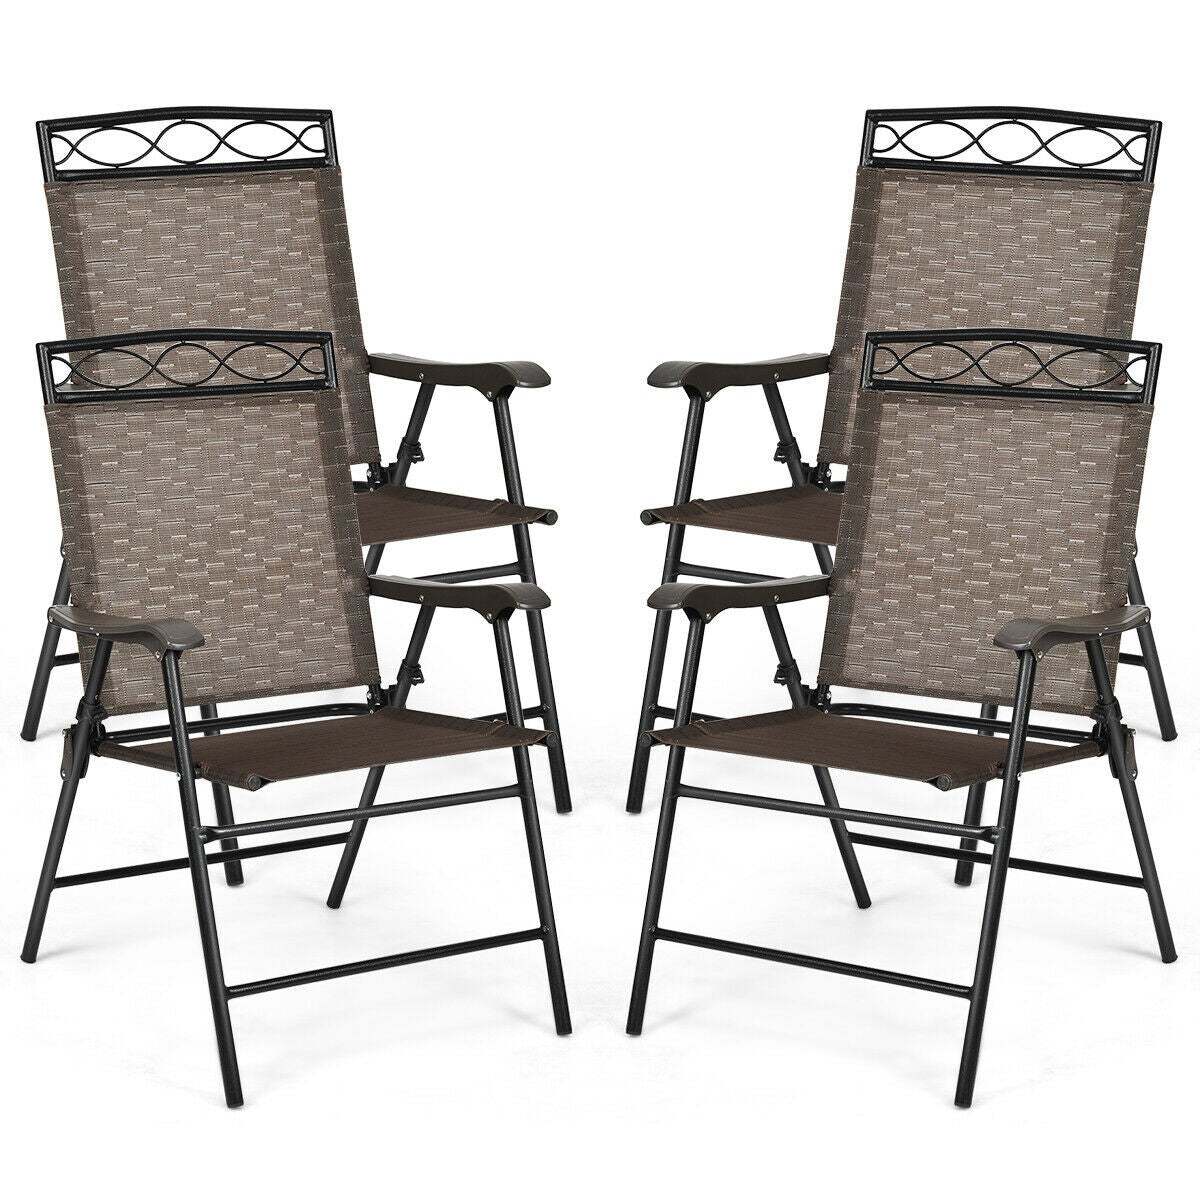 Set of 2 or 4 Patio Chairs, Outdoor Folding Lawn Chairs for Beach